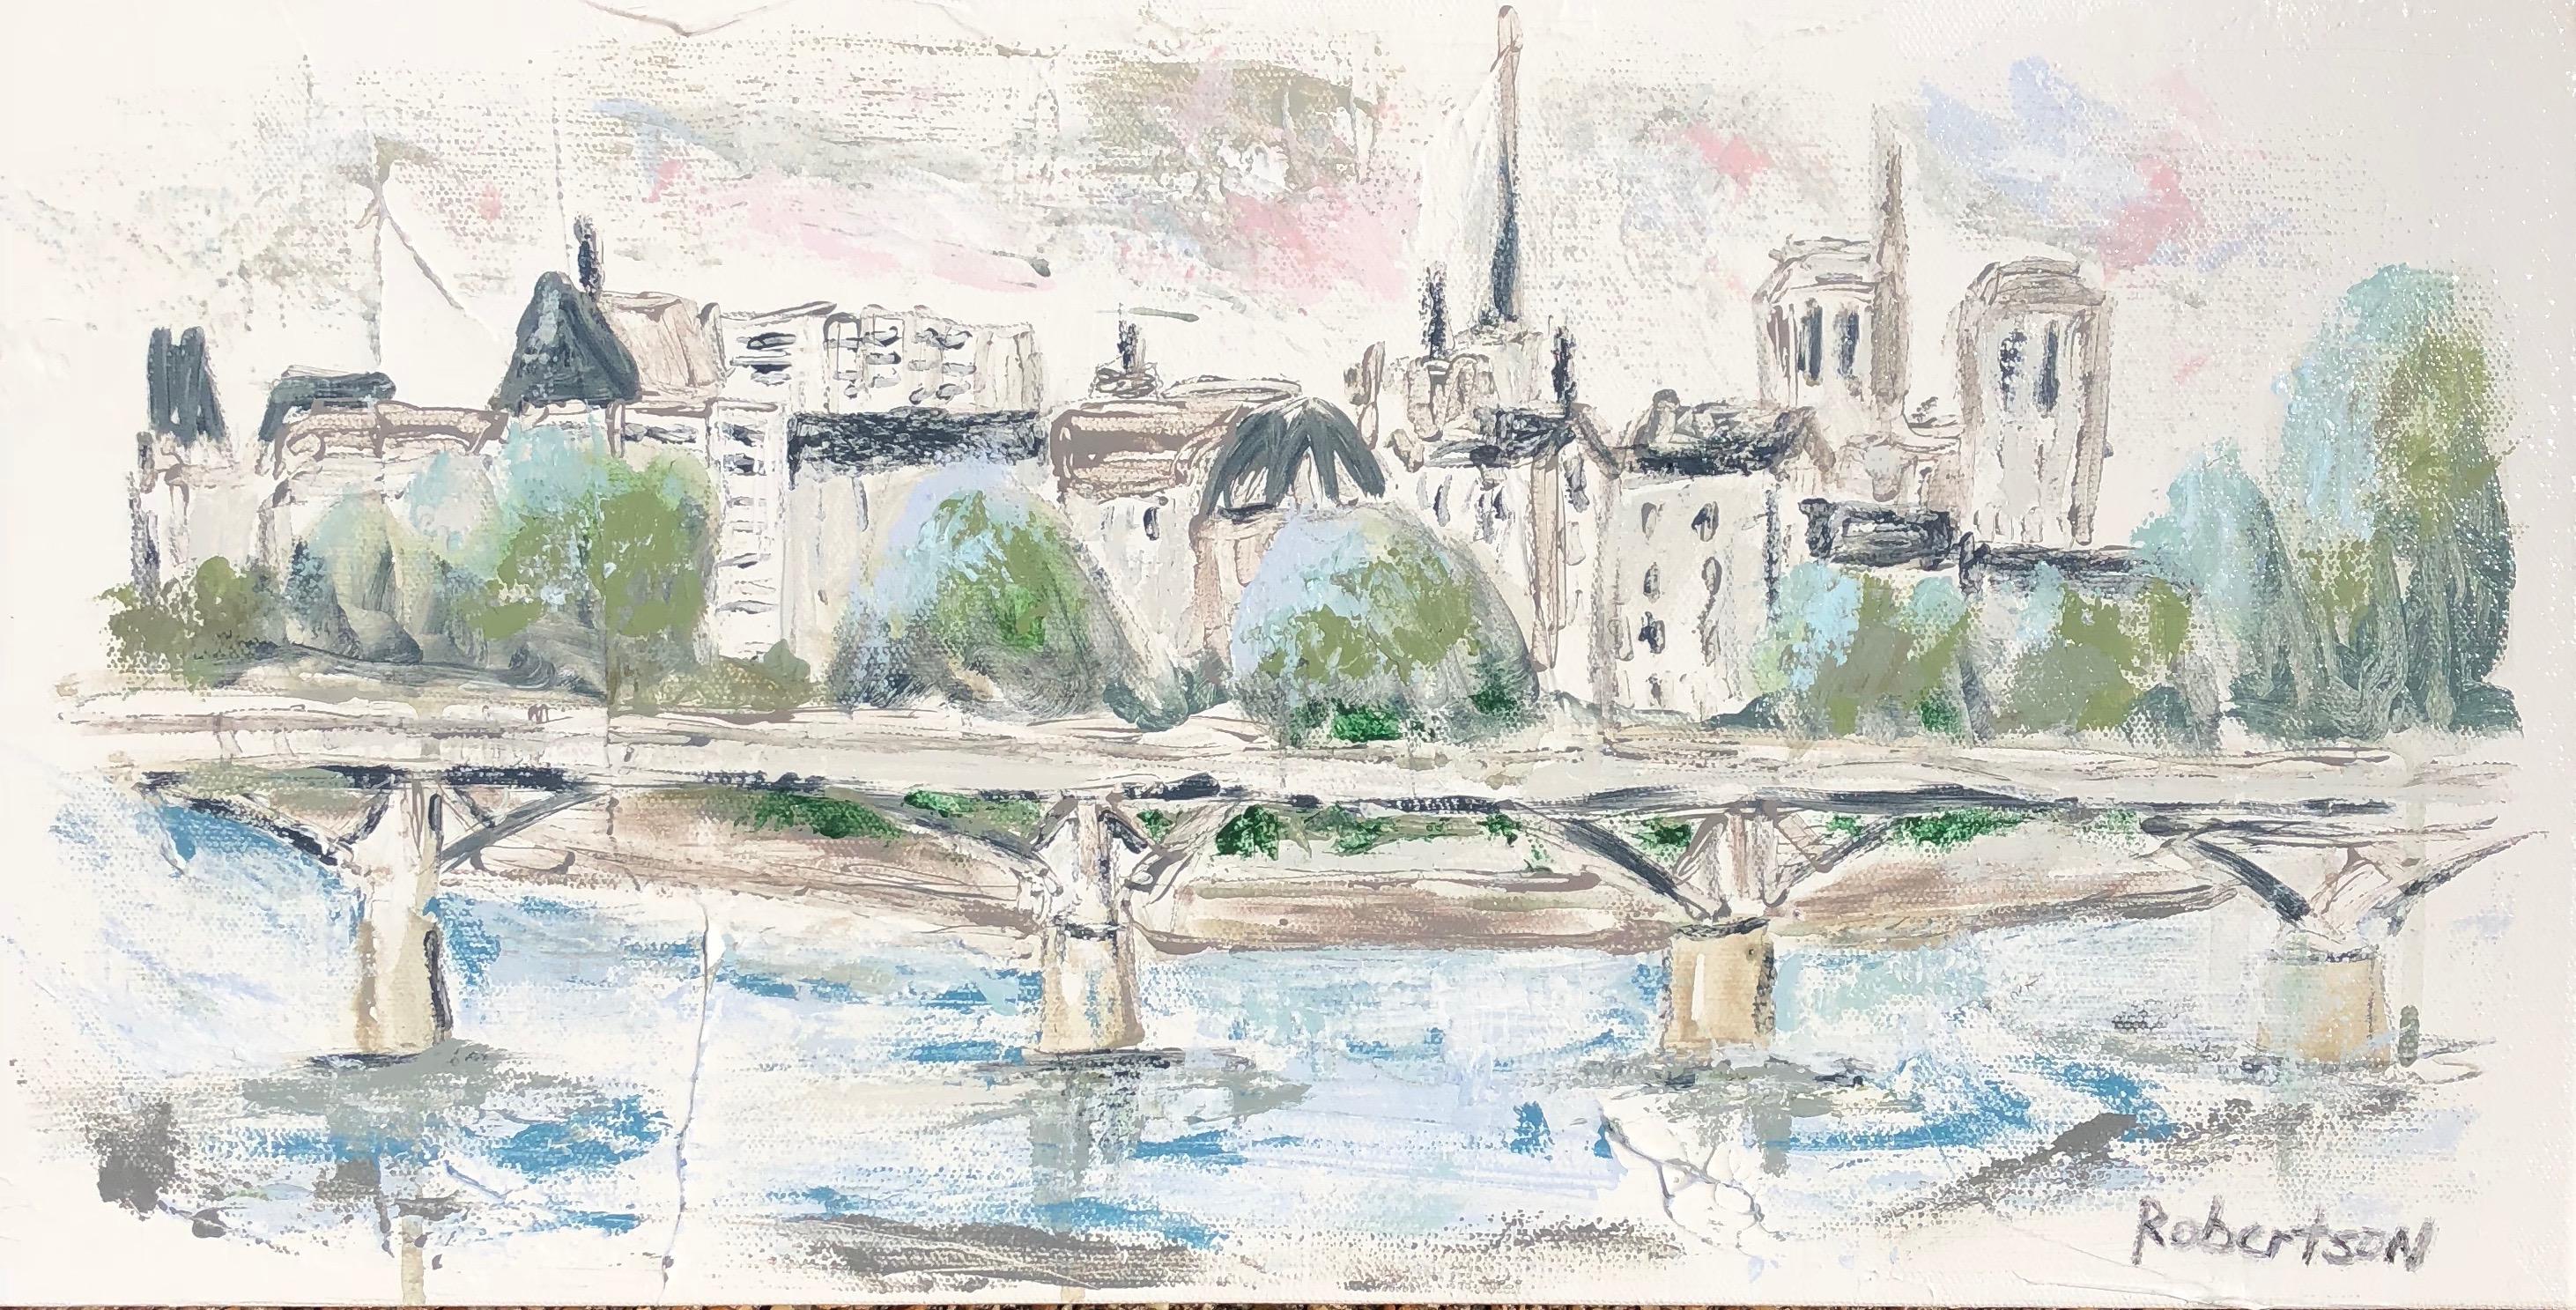 'Pont des Arts Over River Seine' is a small Impressionist mixed media on canvas painting created by American artist Sarah Robertson in 2018. Featuring a lovely Parisian scene, the painting presents a soft palette mostly made of white, grey, blue,